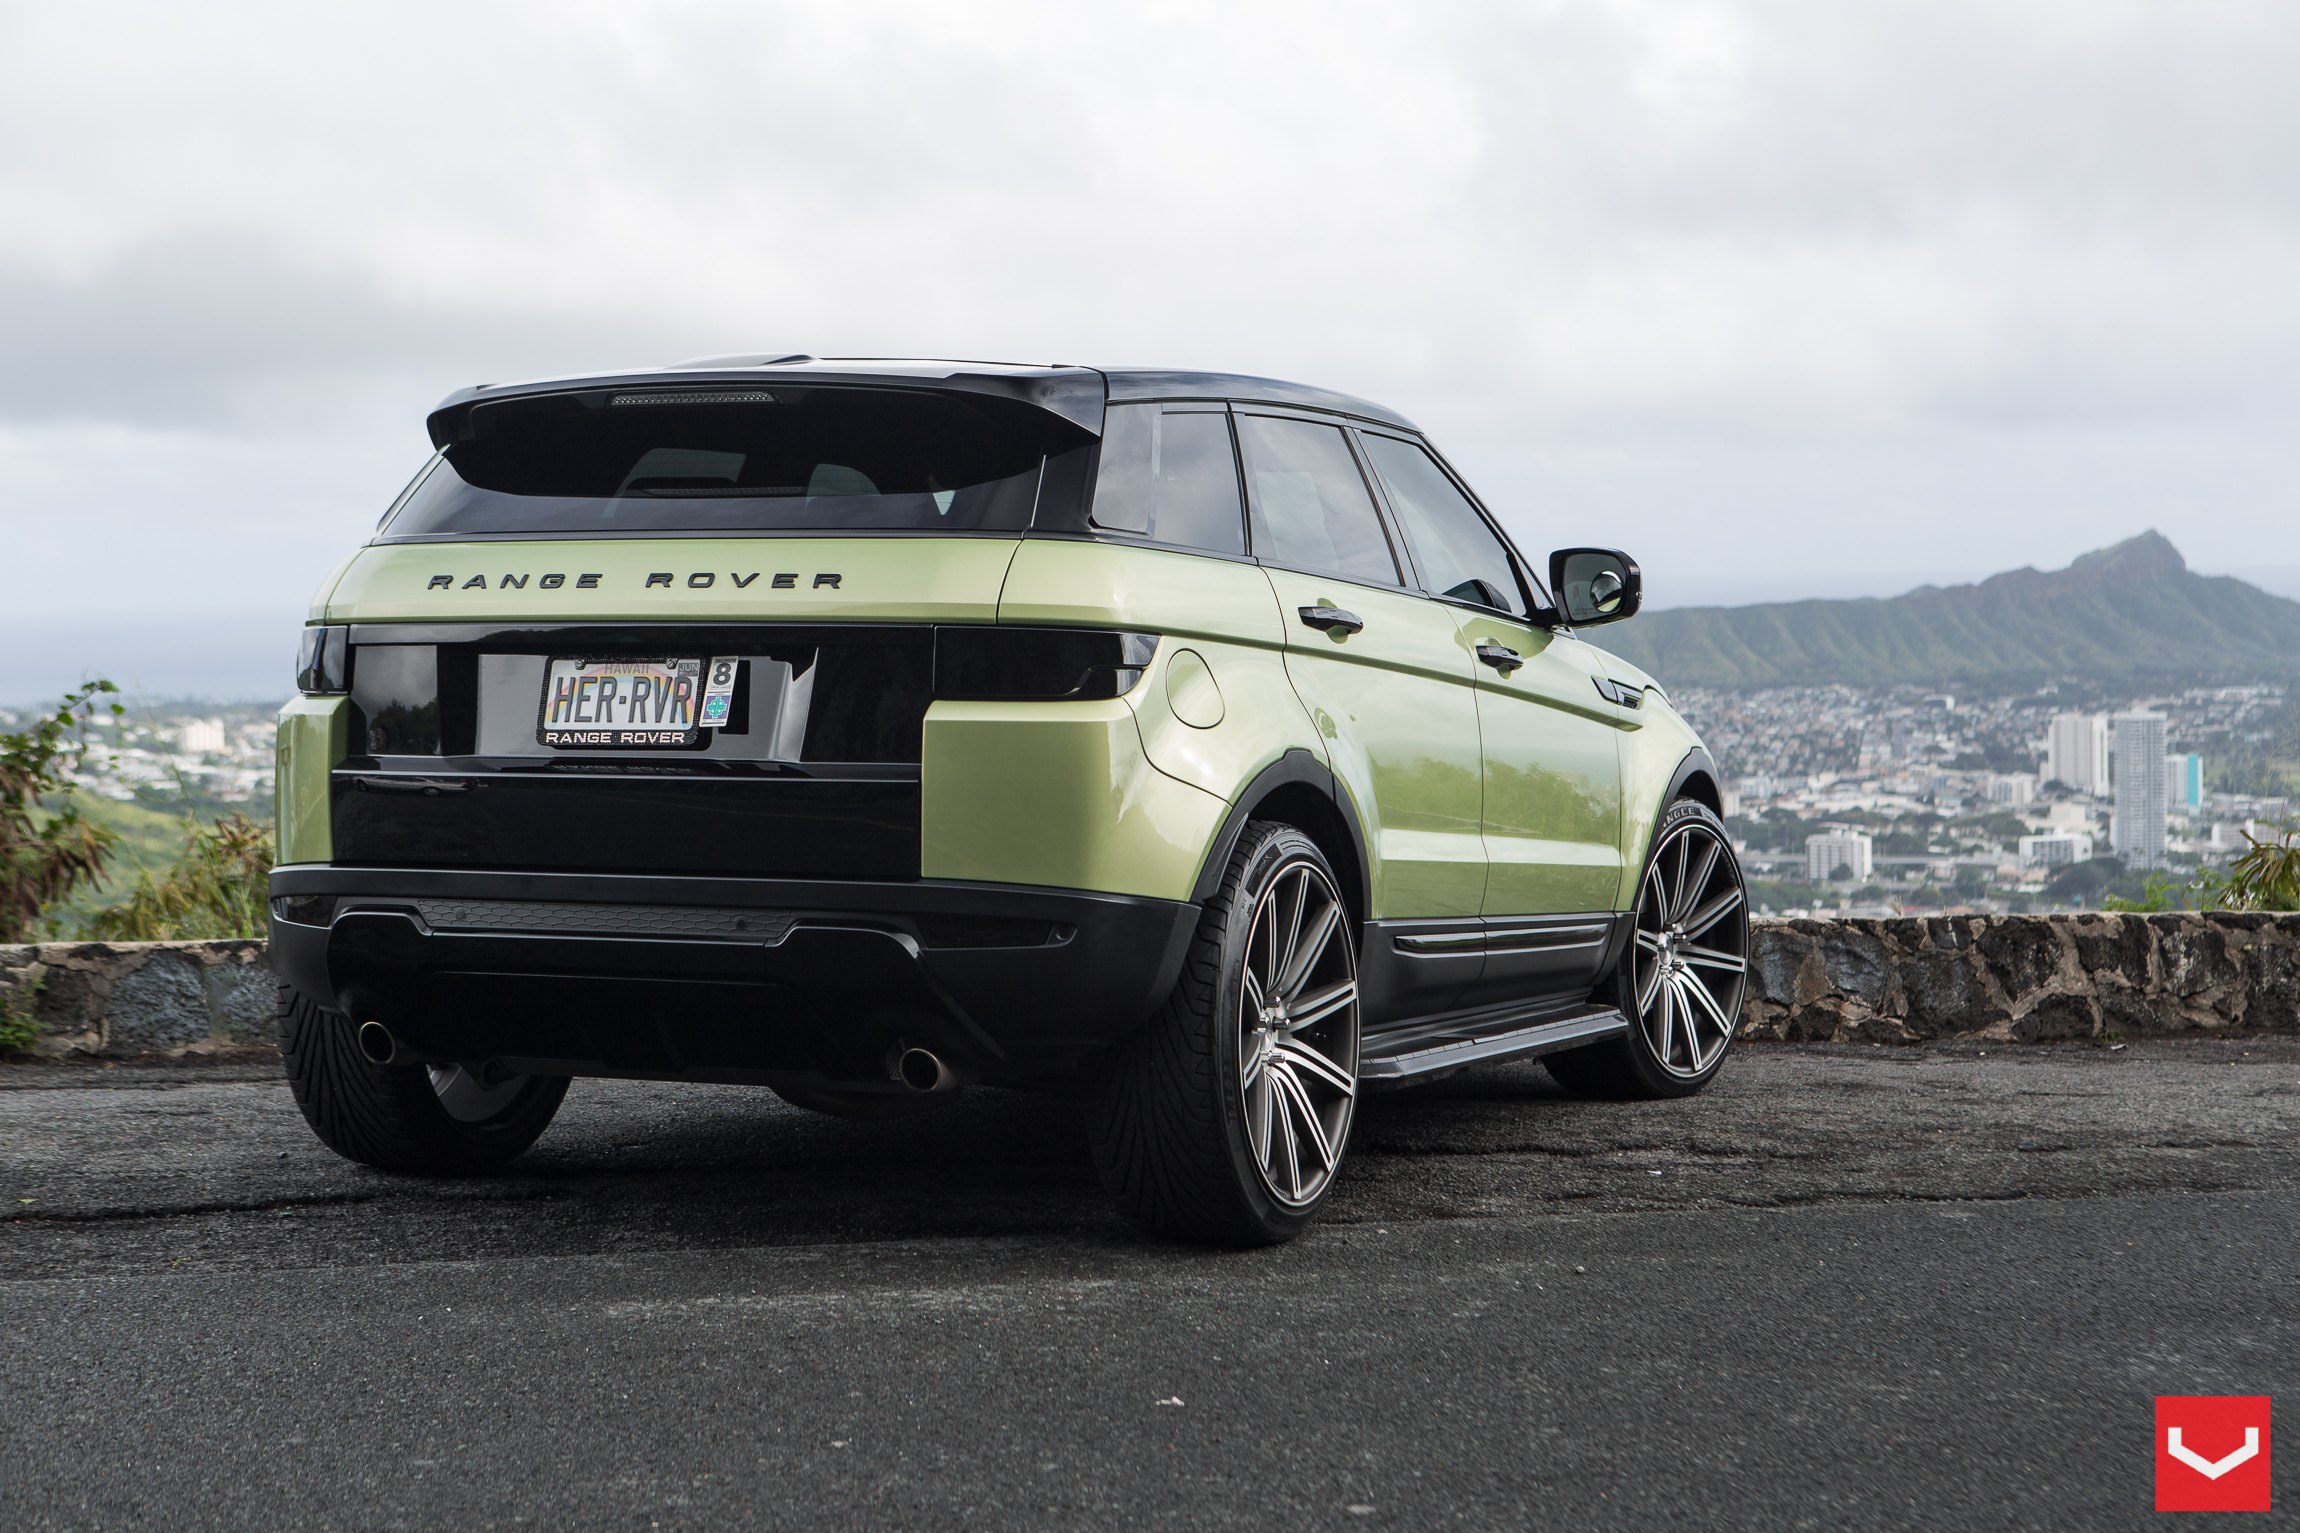 Roofline Spoiler with Light on Green Land Rover Evoque - Photo by Vossen